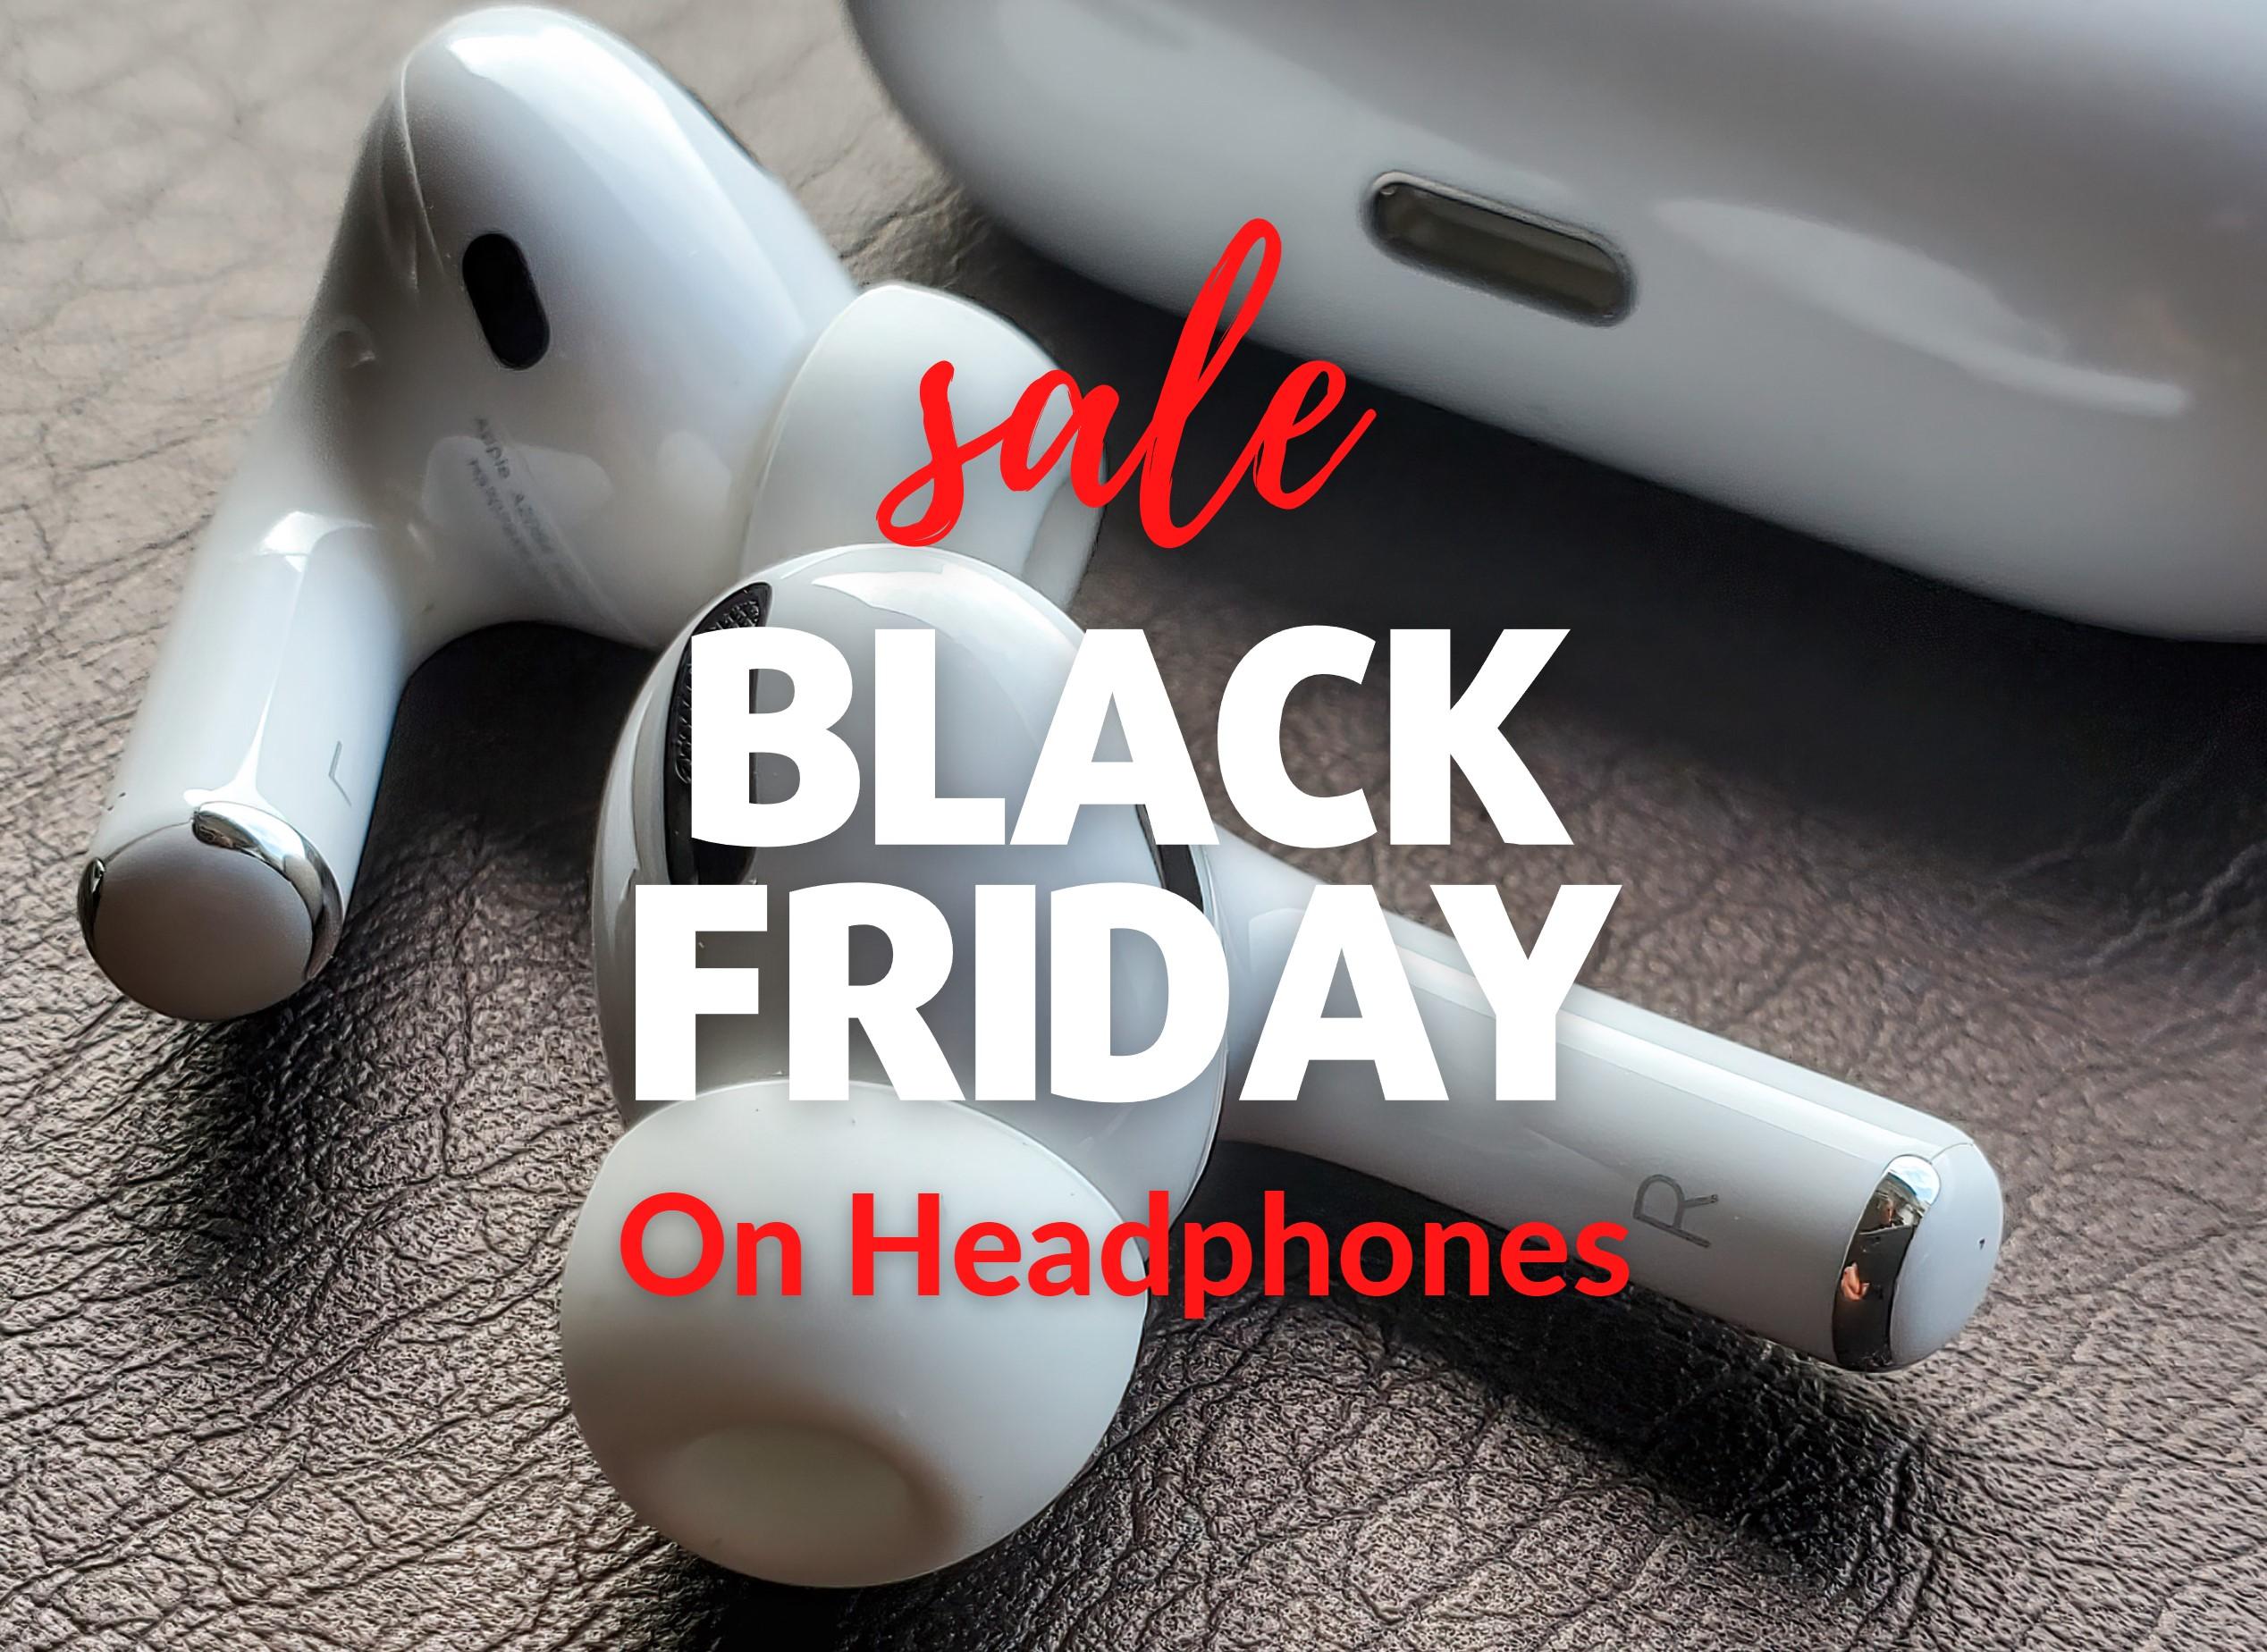 Best Black Friday Headphones Deals on Beats, Bose, Airpods & More